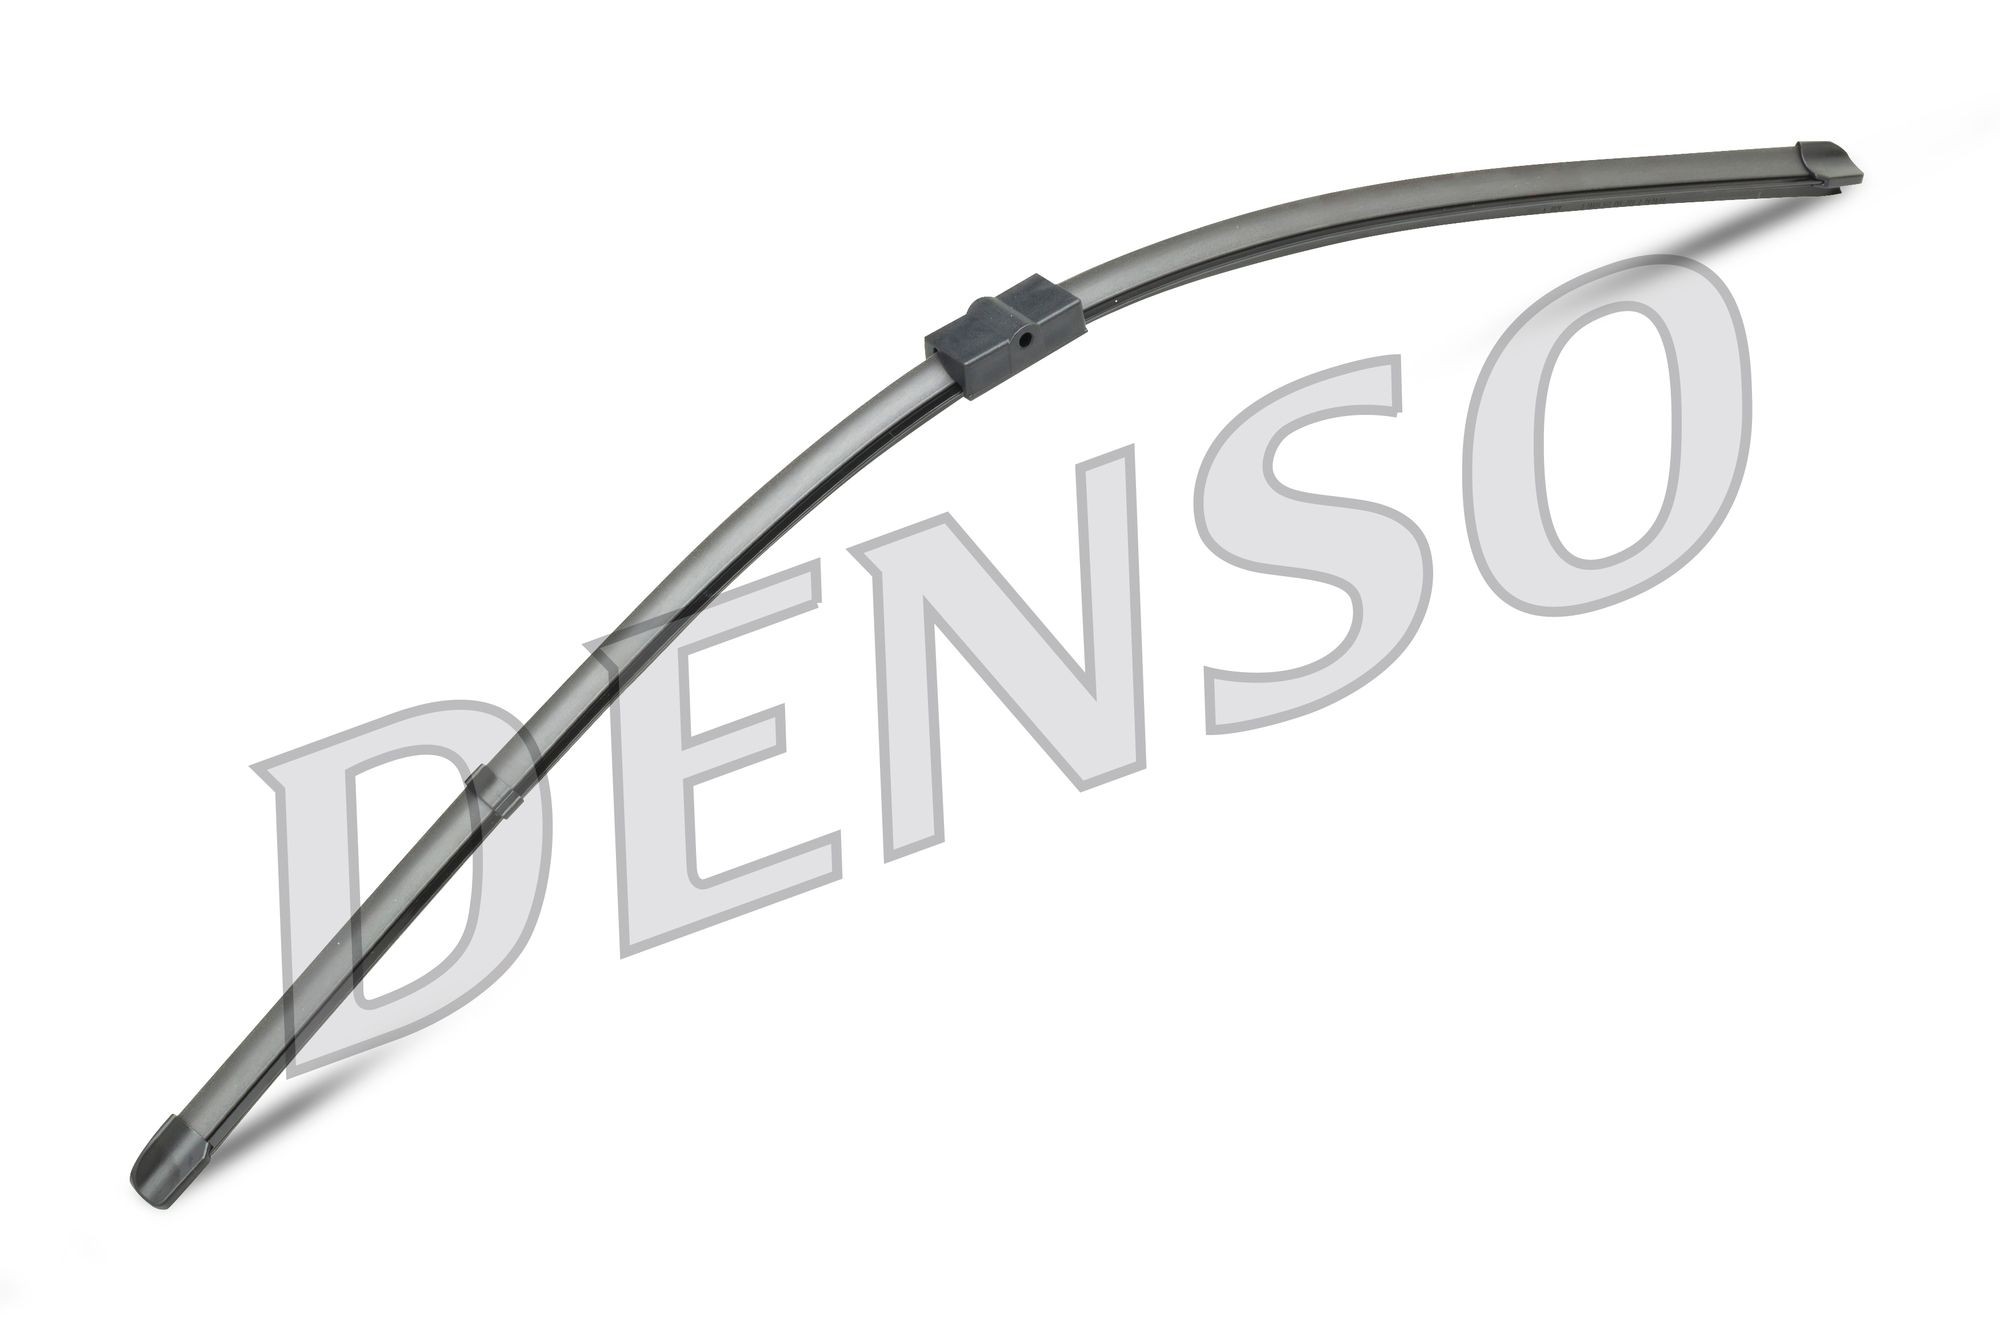 DENSO Windshield wipers DF-123